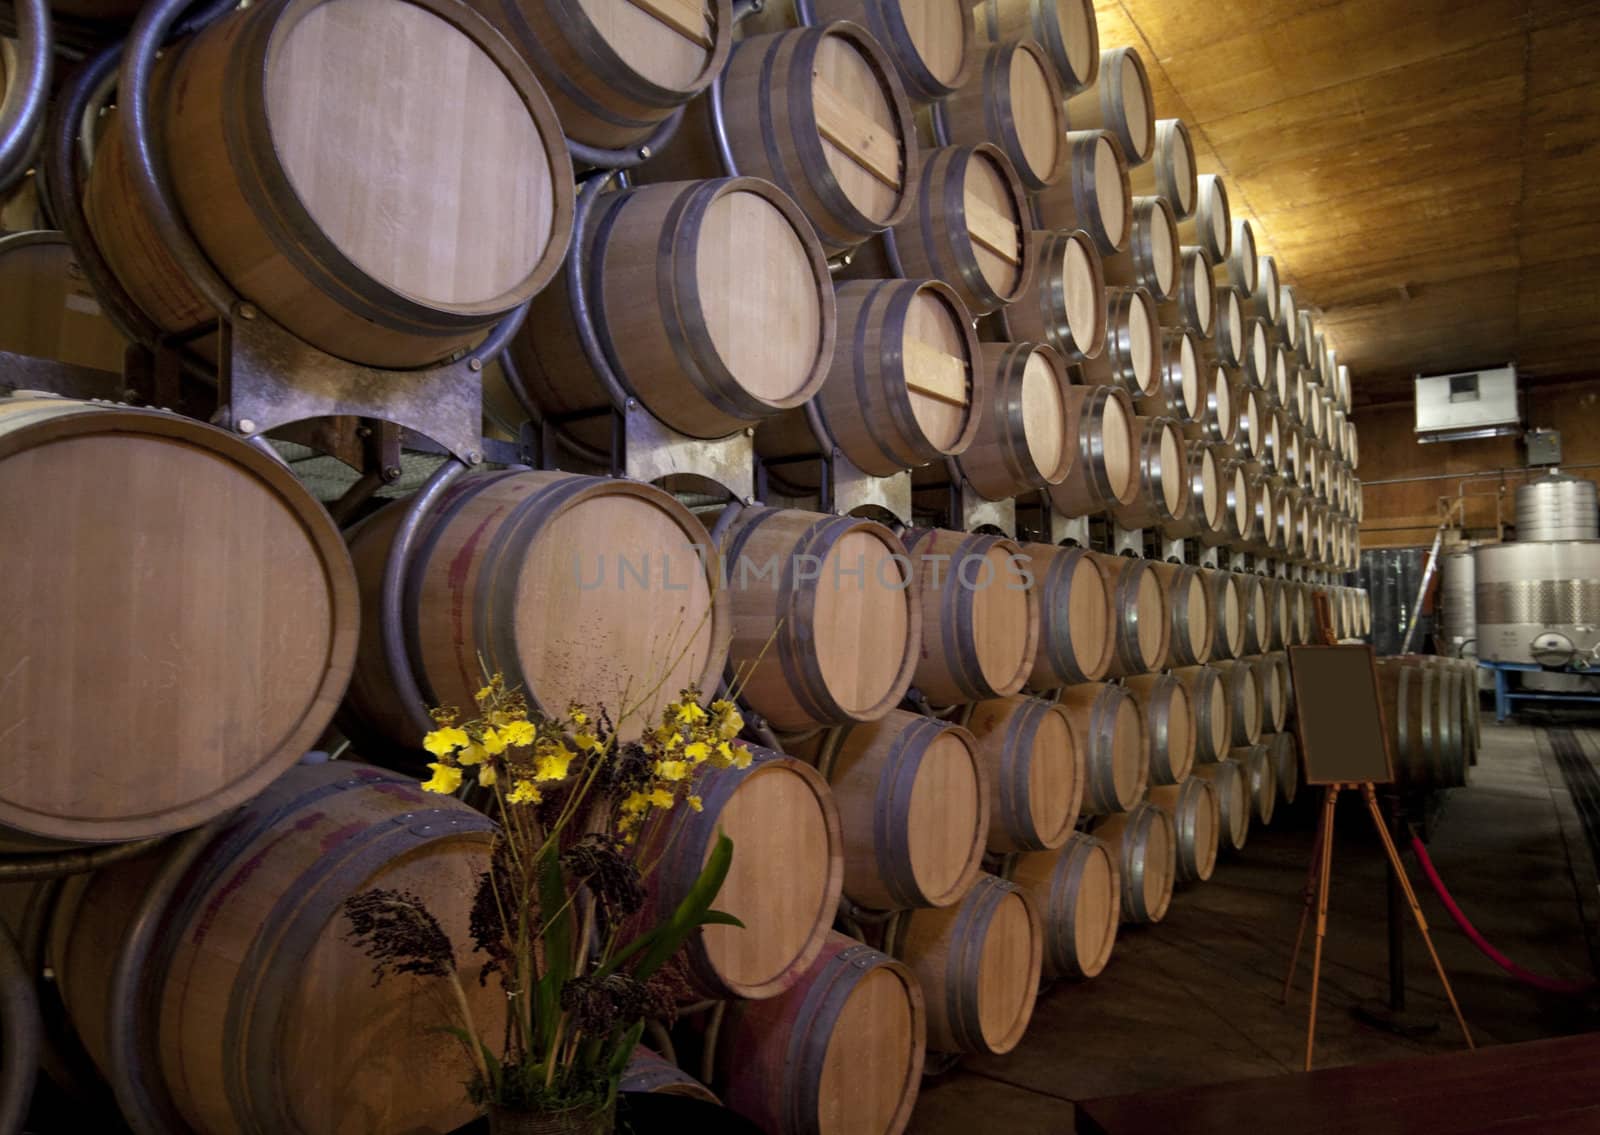 A large stack of barrels that are holding wine